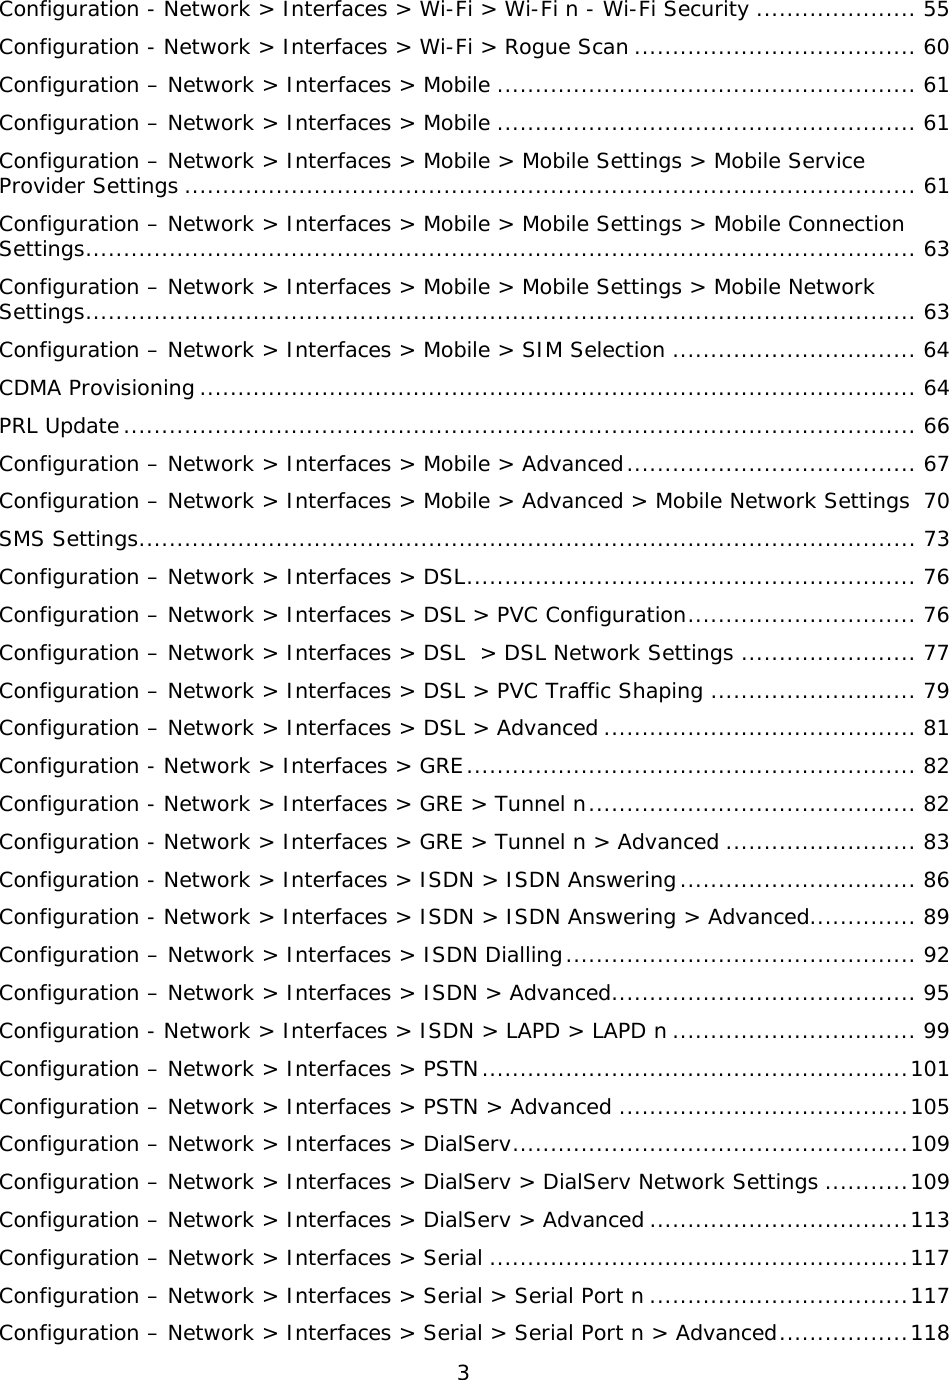 3  Configuration - Network &gt; Interfaces &gt; Wi-Fi &gt; Wi-Fi n - Wi-Fi Security ..................... 55 Configuration - Network &gt; Interfaces &gt; Wi-Fi &gt; Rogue Scan ..................................... 60 Configuration – Network &gt; Interfaces &gt; Mobile ....................................................... 61 Configuration – Network &gt; Interfaces &gt; Mobile ....................................................... 61 Configuration – Network &gt; Interfaces &gt; Mobile &gt; Mobile Settings &gt; Mobile Service Provider Settings ................................................................................................ 61 Configuration – Network &gt; Interfaces &gt; Mobile &gt; Mobile Settings &gt; Mobile Connection Settings ............................................................................................................. 63 Configuration – Network &gt; Interfaces &gt; Mobile &gt; Mobile Settings &gt; Mobile Network Settings ............................................................................................................. 63 Configuration – Network &gt; Interfaces &gt; Mobile &gt; SIM Selection ................................ 64 CDMA Provisioning .............................................................................................. 64 PRL Update ........................................................................................................ 66 Configuration – Network &gt; Interfaces &gt; Mobile &gt; Advanced ...................................... 67 Configuration – Network &gt; Interfaces &gt; Mobile &gt; Advanced &gt; Mobile Network Settings 70 SMS Settings ...................................................................................................... 73 Configuration – Network &gt; Interfaces &gt; DSL ........................................................... 76 Configuration – Network &gt; Interfaces &gt; DSL &gt; PVC Configuration .............................. 76 Configuration – Network &gt; Interfaces &gt; DSL  &gt; DSL Network Settings ....................... 77 Configuration – Network &gt; Interfaces &gt; DSL &gt; PVC Traffic Shaping ........................... 79 Configuration – Network &gt; Interfaces &gt; DSL &gt; Advanced ......................................... 81 Configuration - Network &gt; Interfaces &gt; GRE ........................................................... 82 Configuration - Network &gt; Interfaces &gt; GRE &gt; Tunnel n ........................................... 82 Configuration - Network &gt; Interfaces &gt; GRE &gt; Tunnel n &gt; Advanced ......................... 83 Configuration - Network &gt; Interfaces &gt; ISDN &gt; ISDN Answering ............................... 86 Configuration - Network &gt; Interfaces &gt; ISDN &gt; ISDN Answering &gt; Advanced.............. 89 Configuration – Network &gt; Interfaces &gt; ISDN Dialling .............................................. 92 Configuration – Network &gt; Interfaces &gt; ISDN &gt; Advanced ........................................ 95 Configuration - Network &gt; Interfaces &gt; ISDN &gt; LAPD &gt; LAPD n ................................ 99 Configuration – Network &gt; Interfaces &gt; PSTN ........................................................ 101 Configuration – Network &gt; Interfaces &gt; PSTN &gt; Advanced ...................................... 105 Configuration – Network &gt; Interfaces &gt; DialServ .................................................... 109 Configuration – Network &gt; Interfaces &gt; DialServ &gt; DialServ Network Settings ........... 109 Configuration – Network &gt; Interfaces &gt; DialServ &gt; Advanced .................................. 113 Configuration – Network &gt; Interfaces &gt; Serial ....................................................... 117 Configuration – Network &gt; Interfaces &gt; Serial &gt; Serial Port n .................................. 117 Configuration – Network &gt; Interfaces &gt; Serial &gt; Serial Port n &gt; Advanced ................. 118 